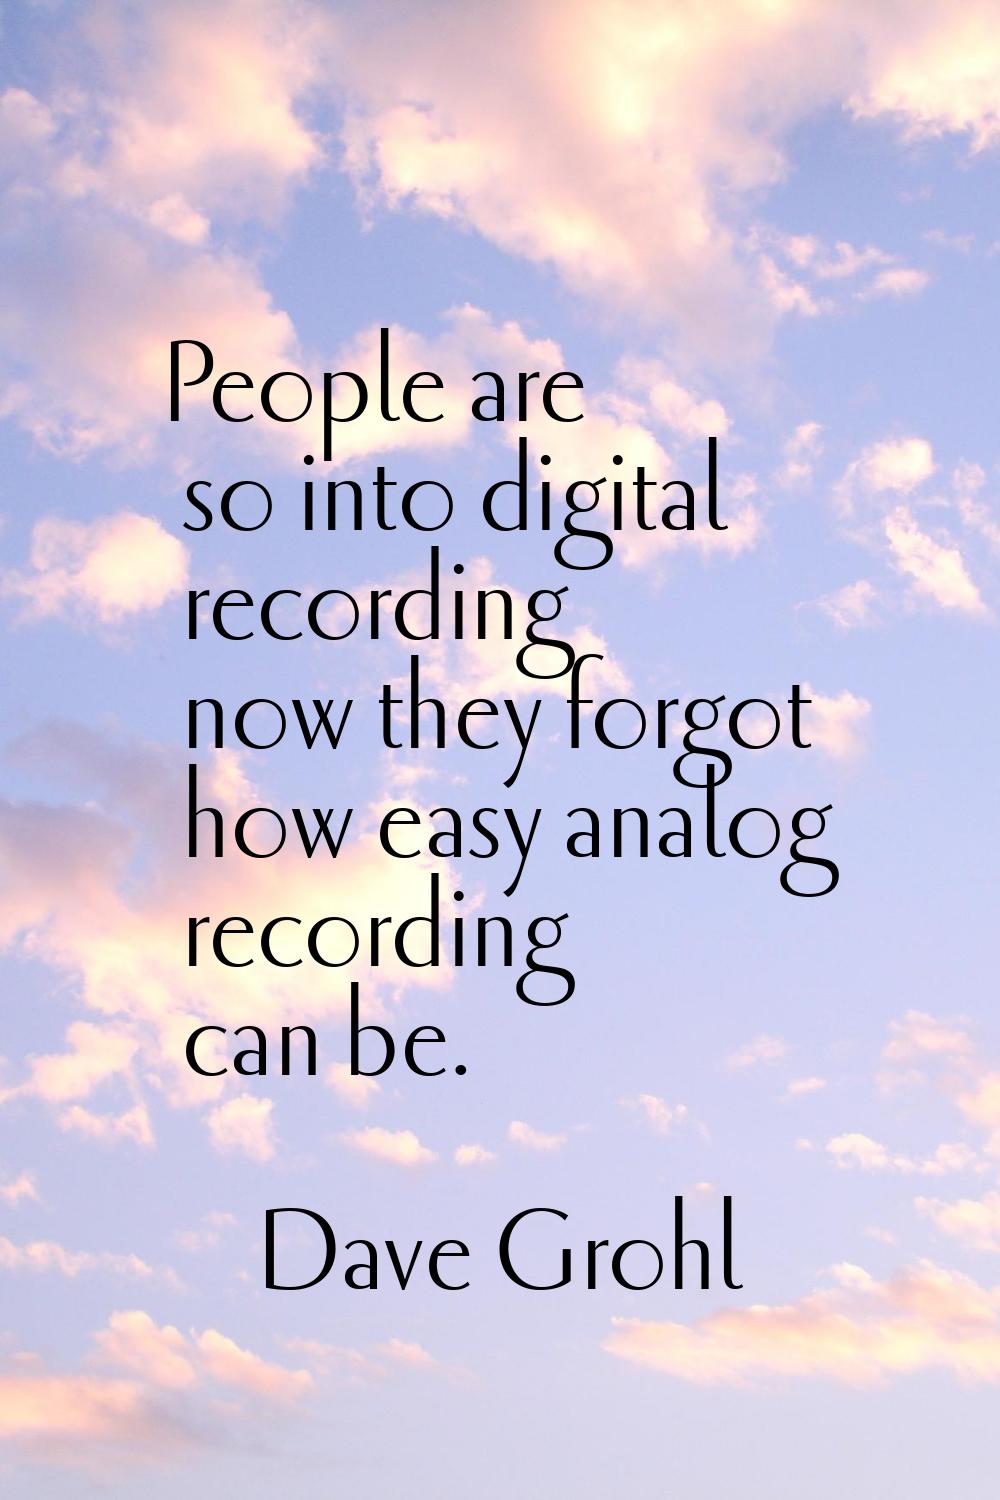 People are so into digital recording now they forgot how easy analog recording can be.